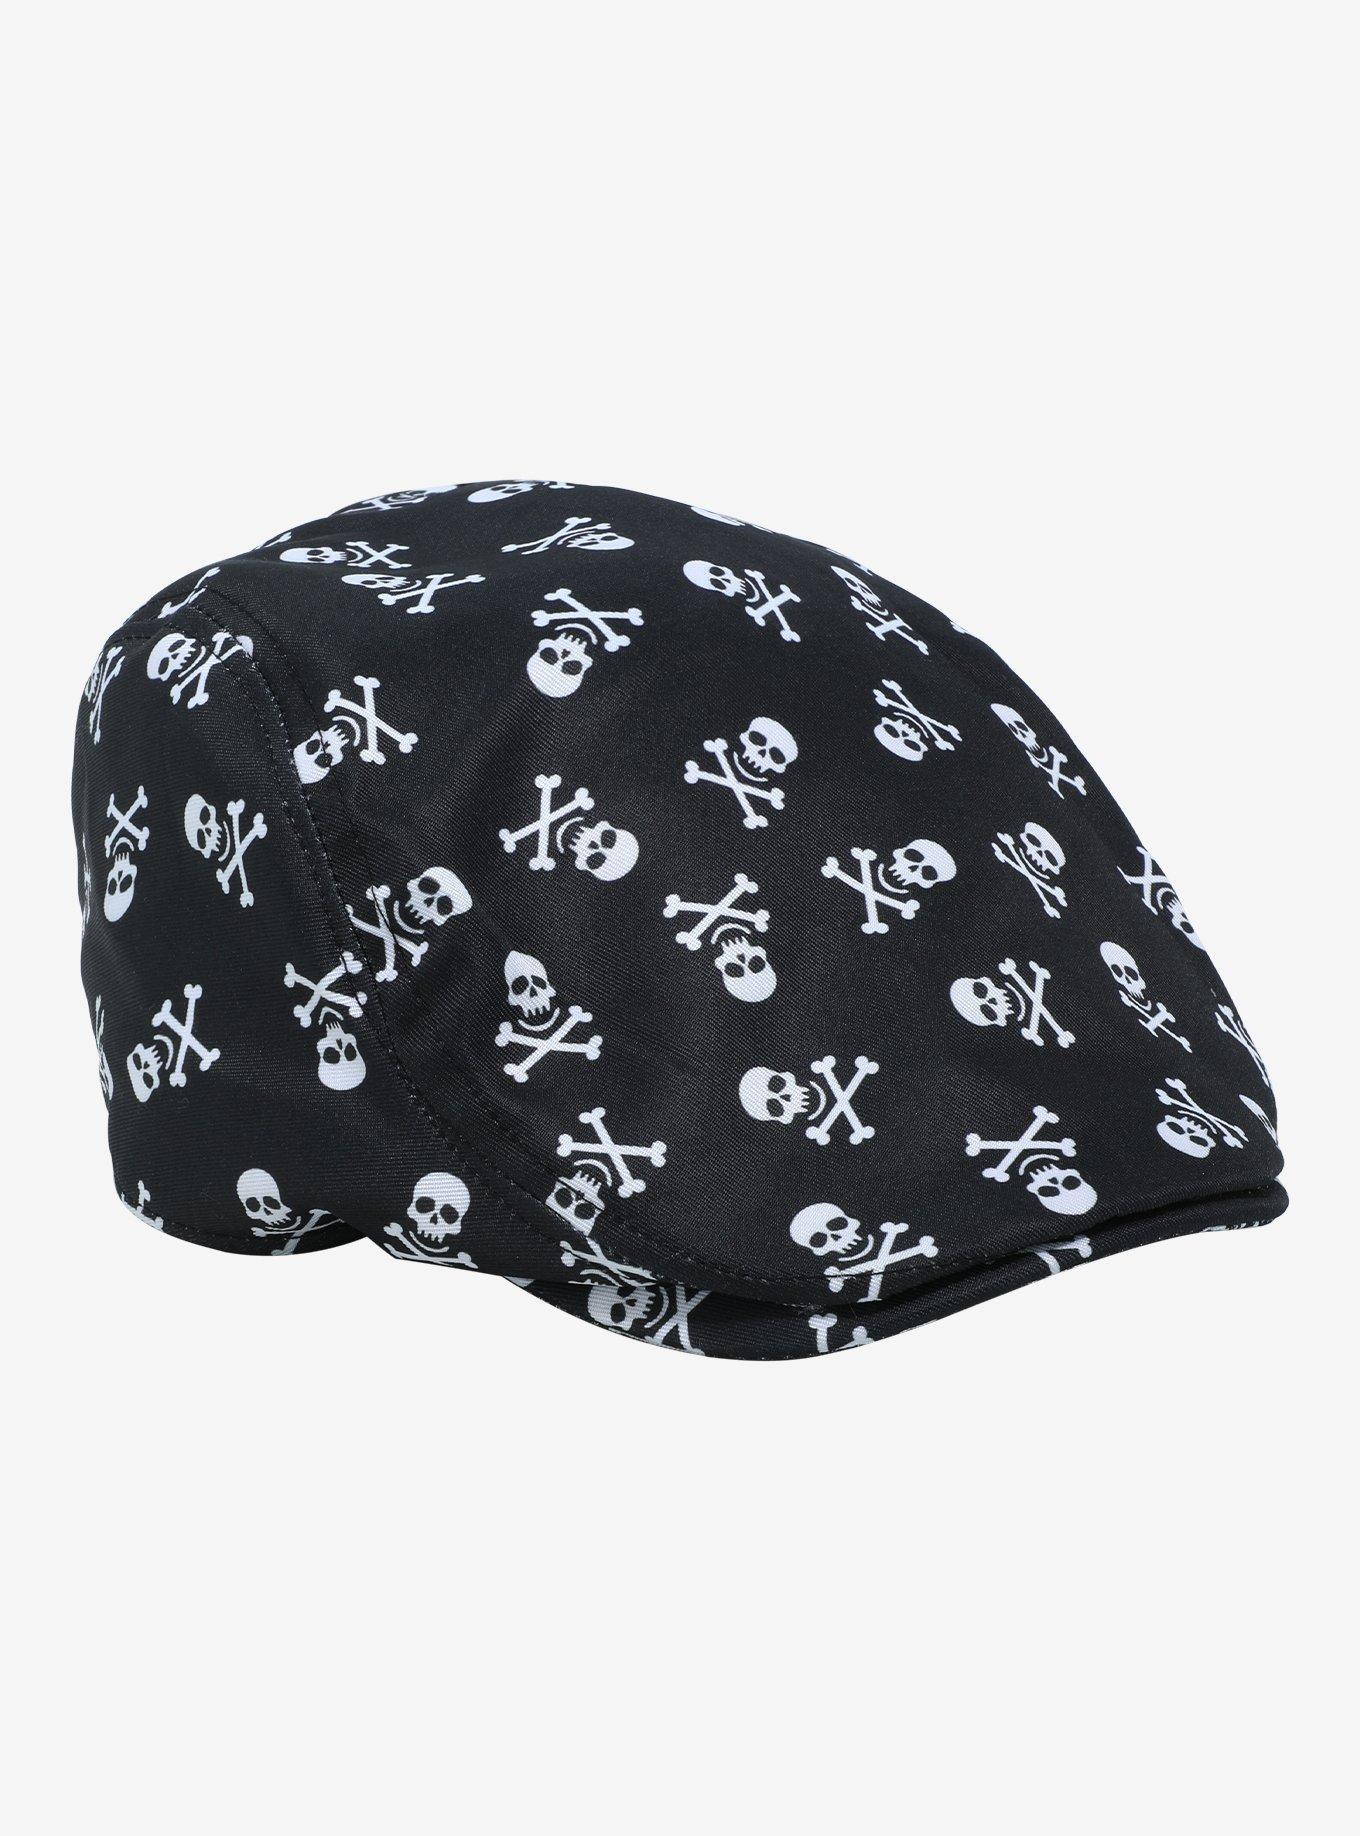 SKULL WITH SPORT KNIT HAT, Giftware Skulls , wholesale tools at